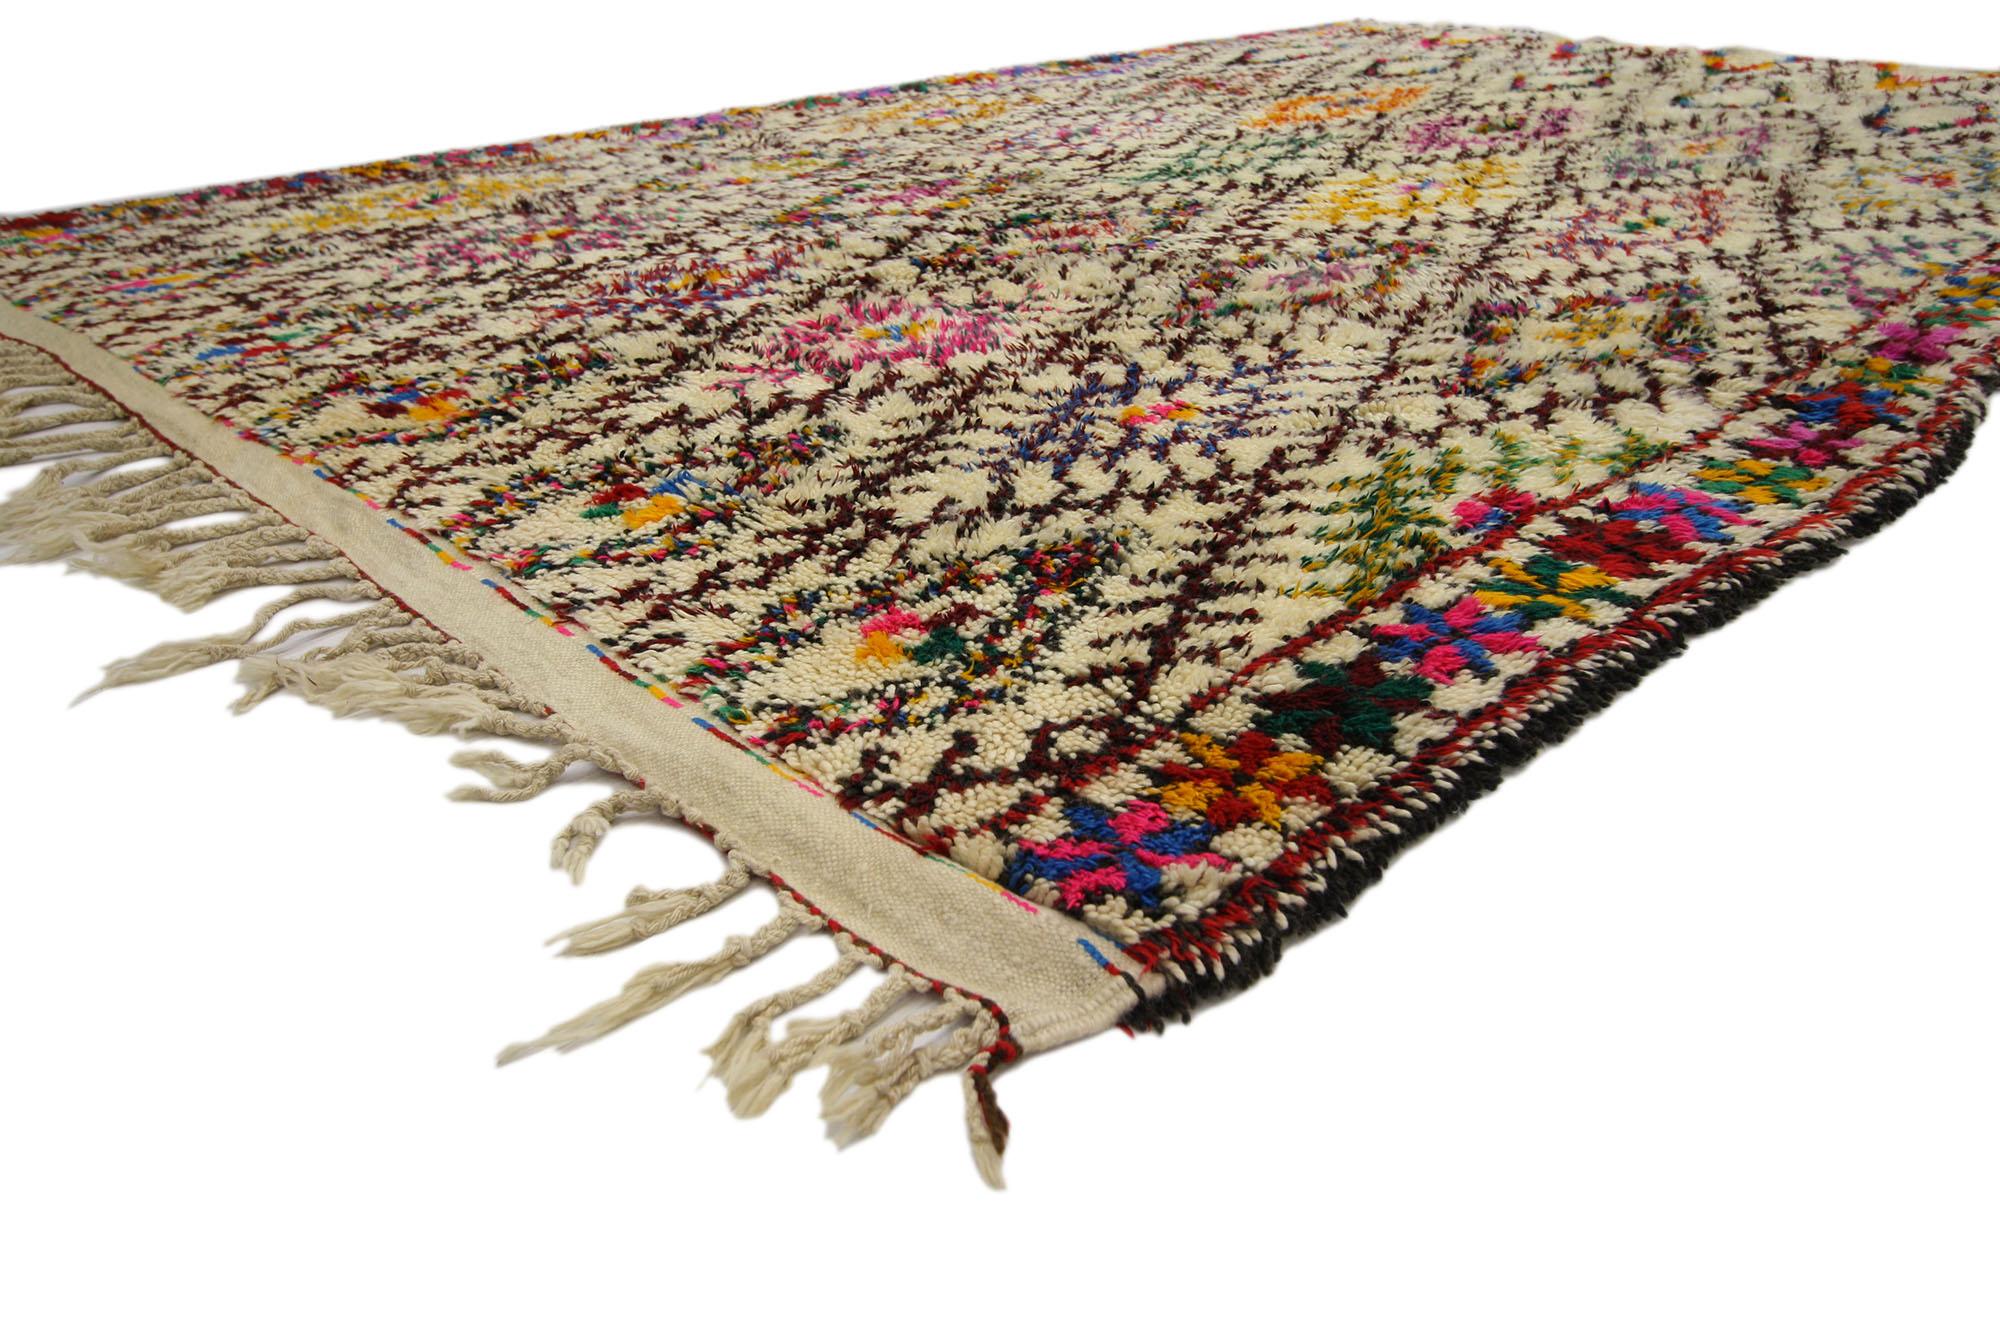 20695 Vintage Moroccan Beni Ourain Rug, 06'07 x 09'10.
Colorfully curated meets boho chic in this hand knotted wool vintage Moroccan Beni Ourain rug. The detailed diamond design and happy hues woven into this piece work creating an ininimitable